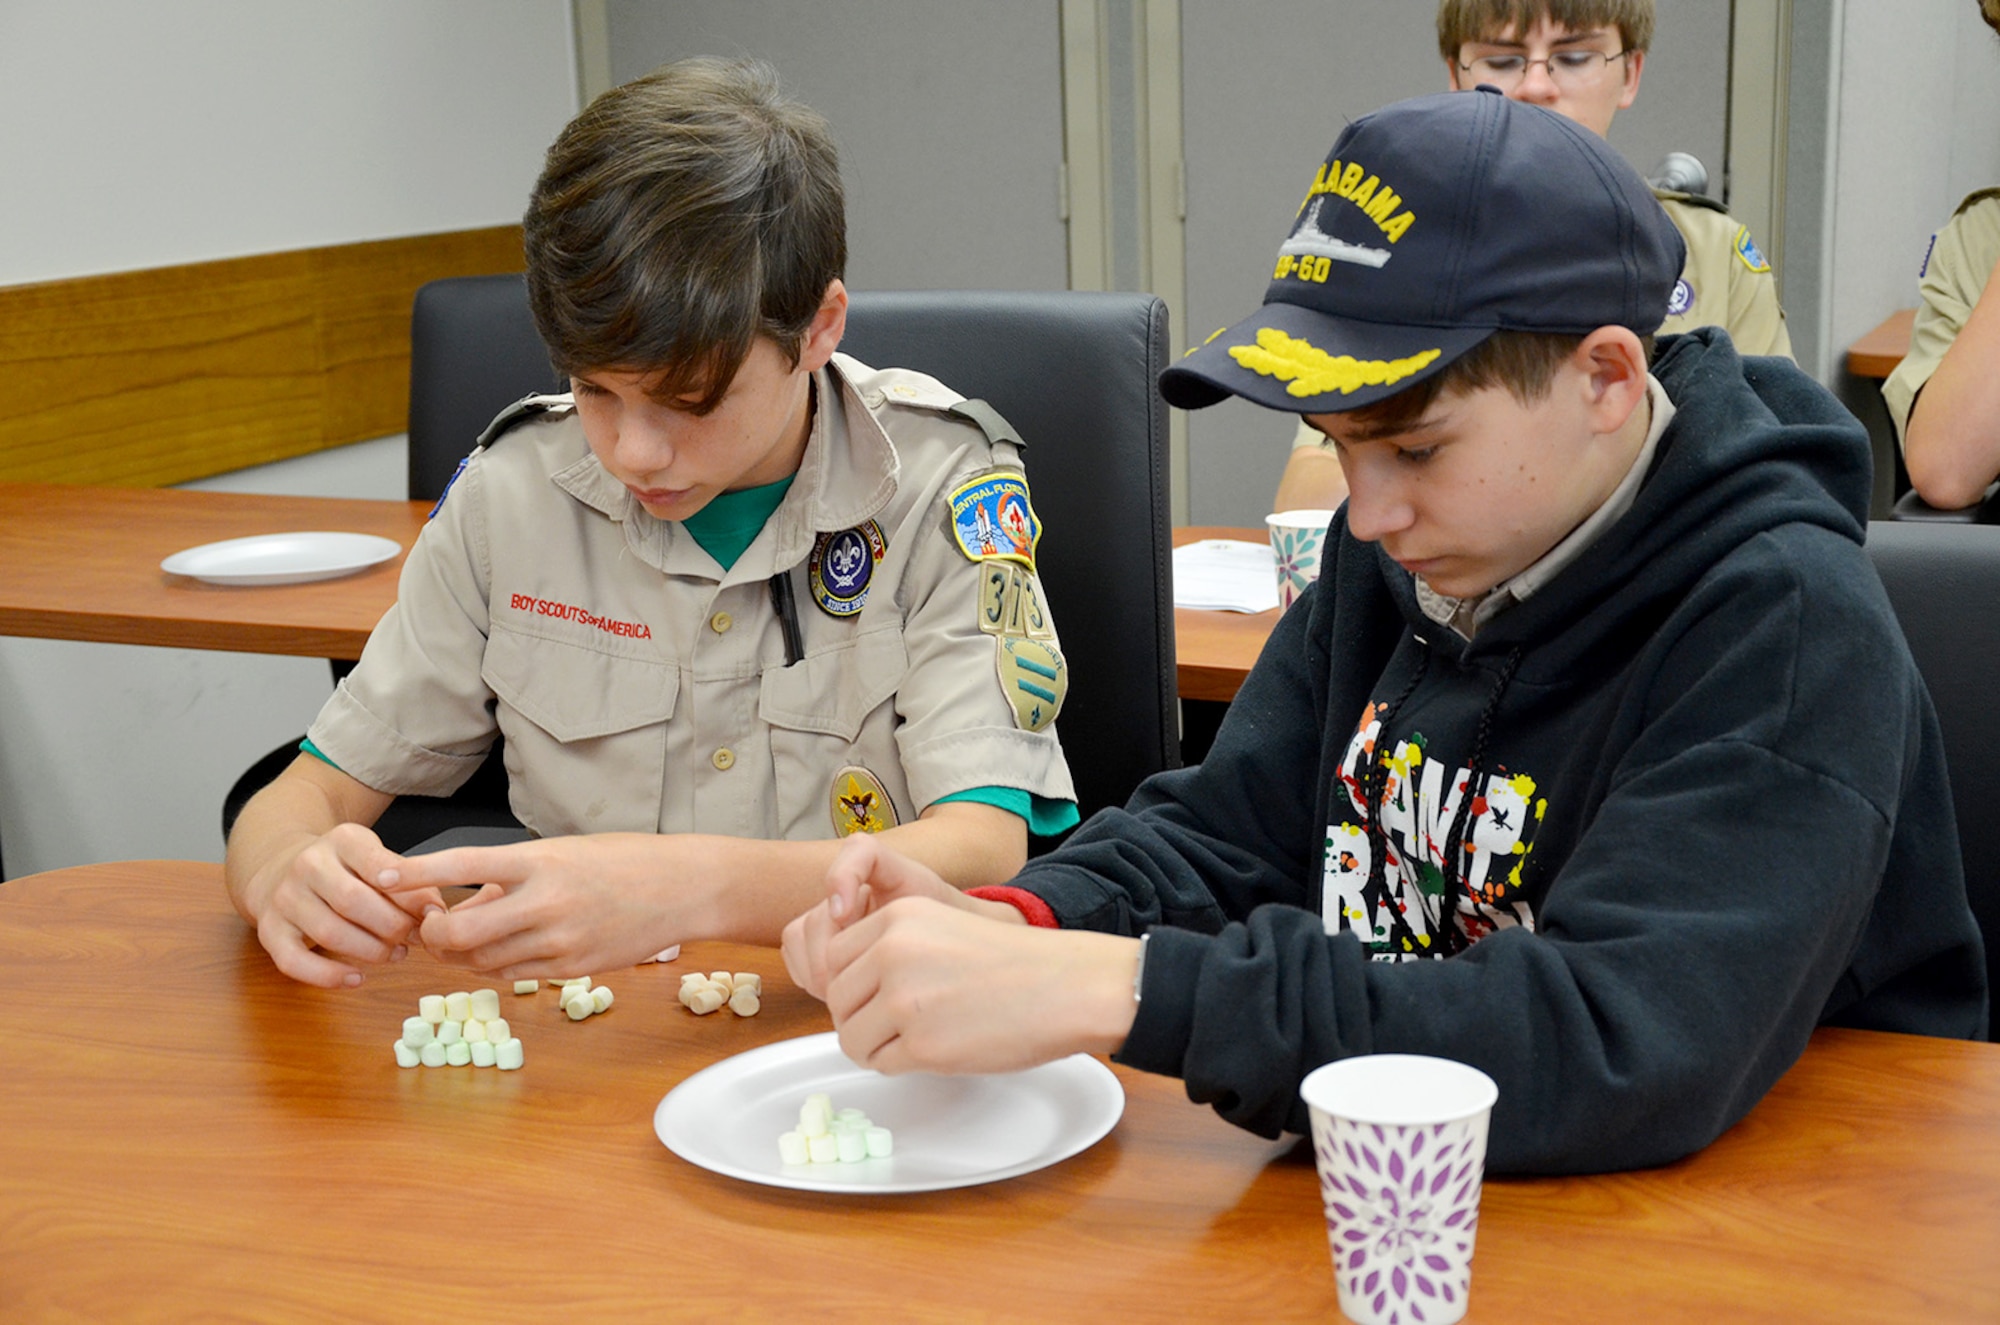 Robbie Naberhaus (left) and Jack Gander, both 8th graders at Ascension Catholic School and members of Boy Scout Troop #373 in Melbourne, Fla., attempt to build an atomic model using miniature marshmallows during an event hosted by the Air Force Technical Applications Center, Patrick AFB, Fla., March 31, 2018.  The boys were two of 98 scouts who traveled to the base to earn their Nuclear Science Merit Badge with the help of Airmen from the Department of Defense’s sole nuclear treaty monitoring center.  (U.S. Air Force photo by Susan A. Romano)